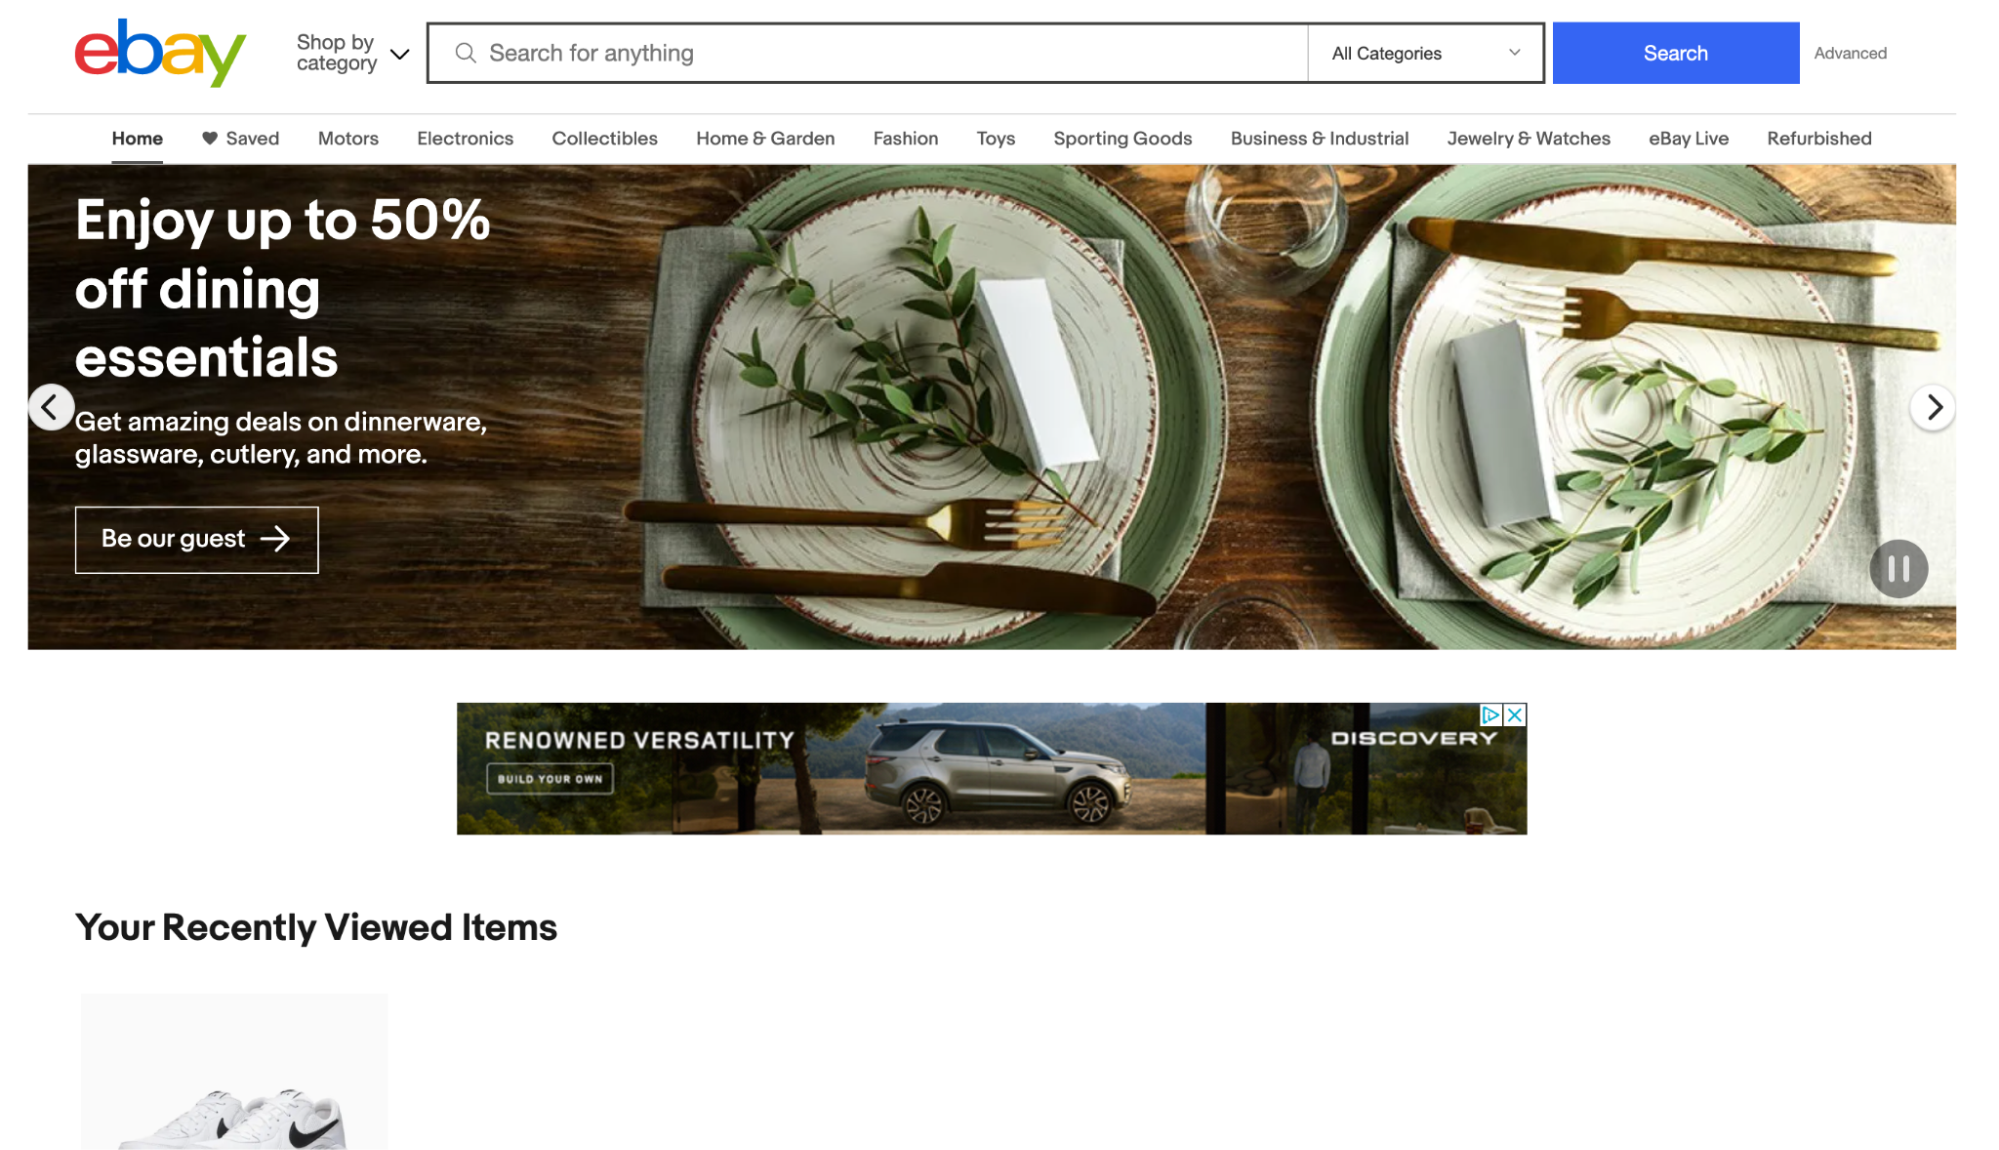 Ebay homepage with banner advertising dining sets, showing gold-rimmed plates, knives, and forks.